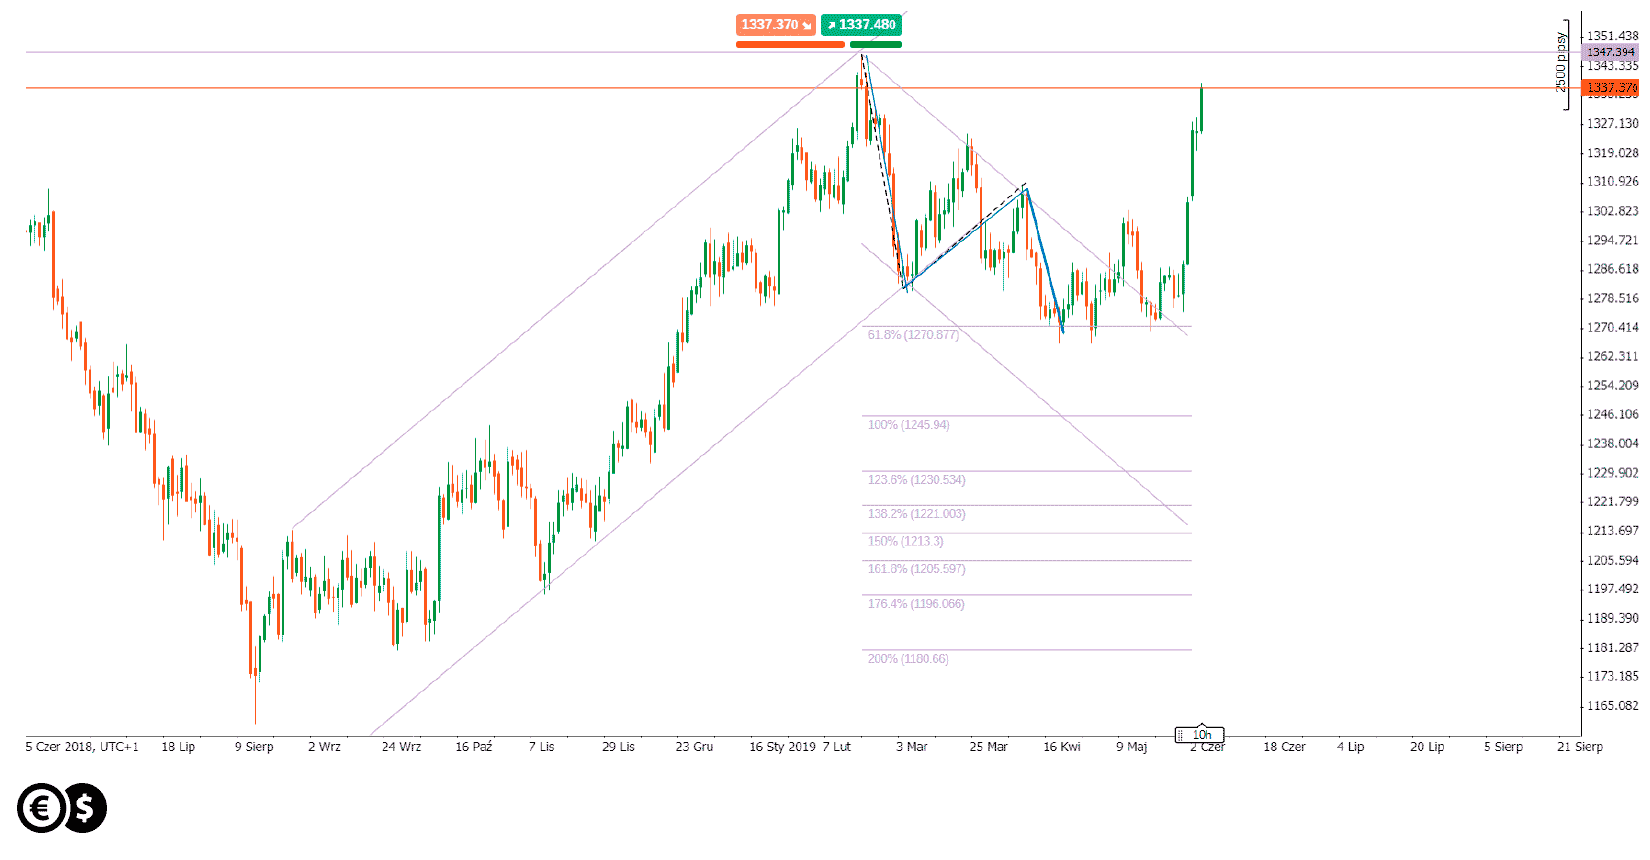 The daily chart of gold